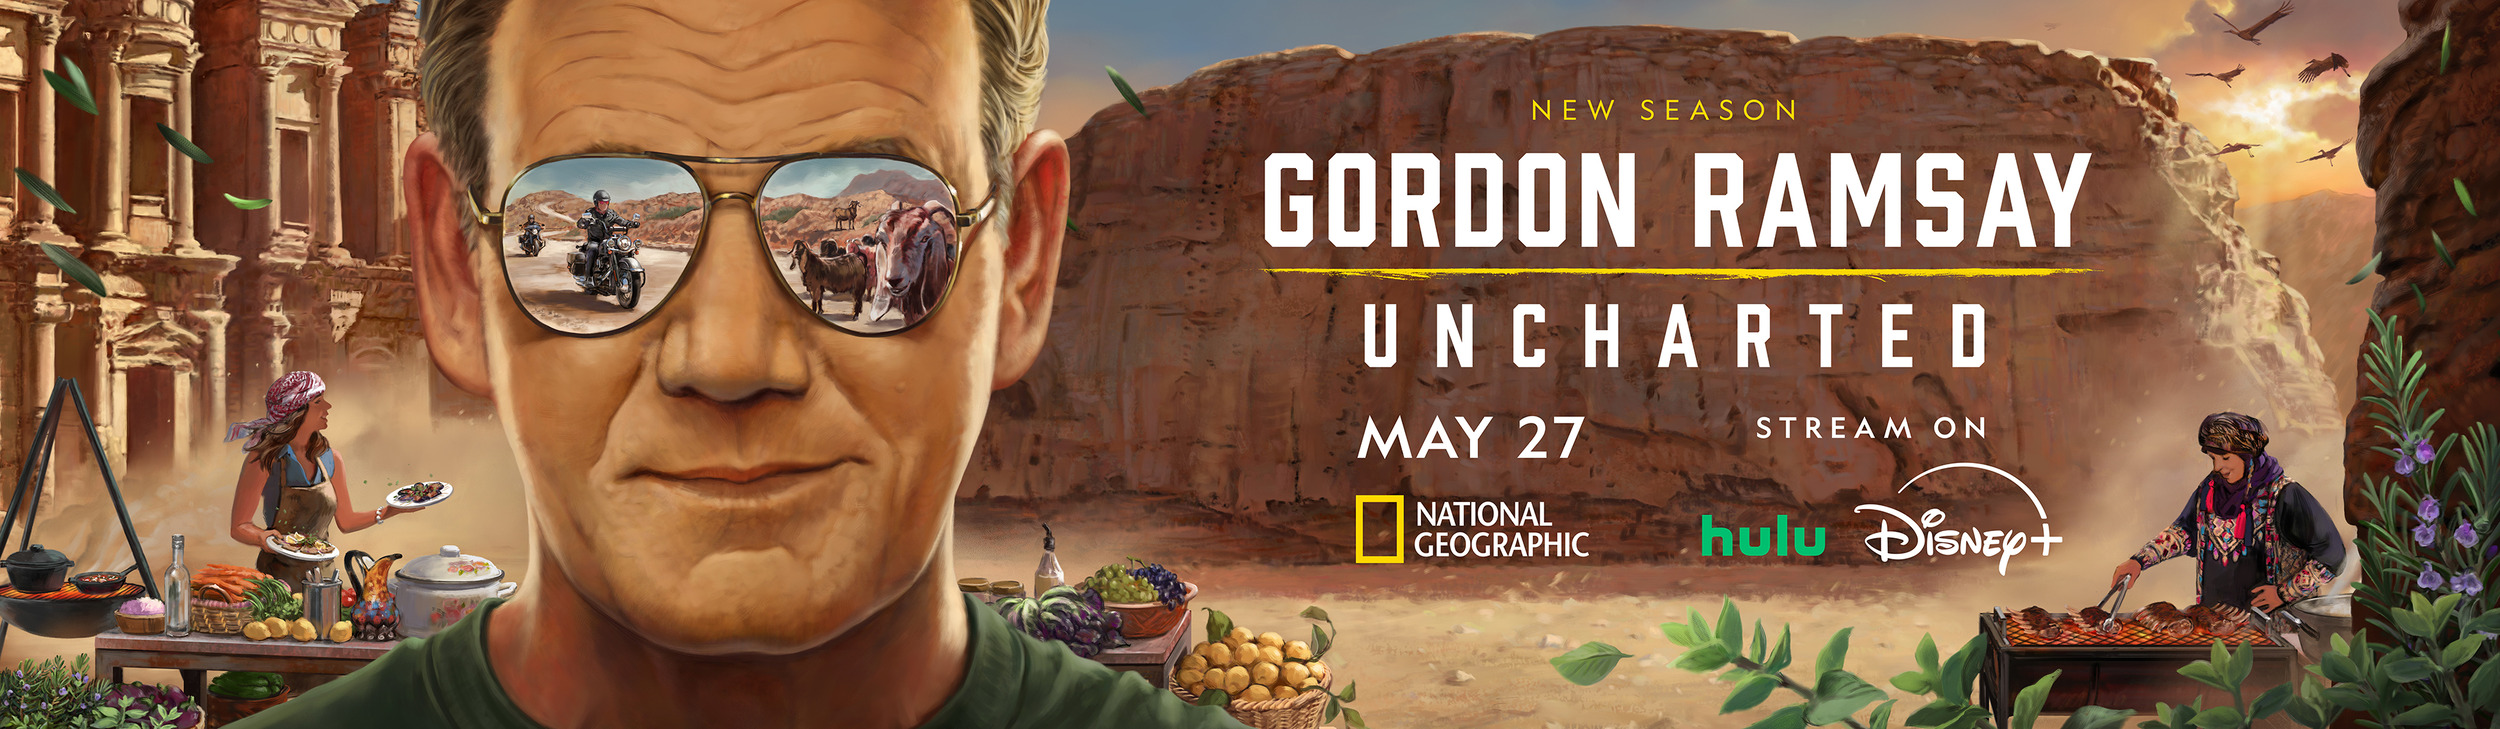 Mega Sized TV Poster Image for Gordon Ramsay: Uncharted (#4 of 4)